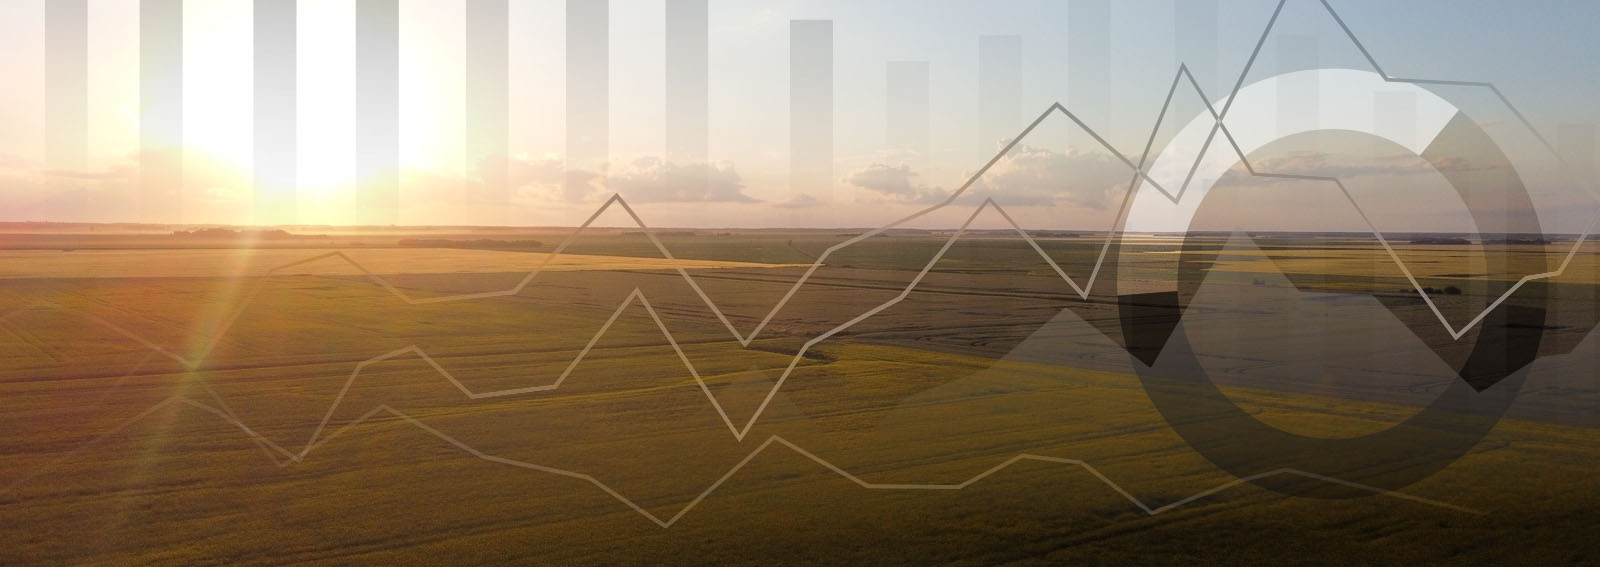 Financial graphs overlaid on top of a farmers field